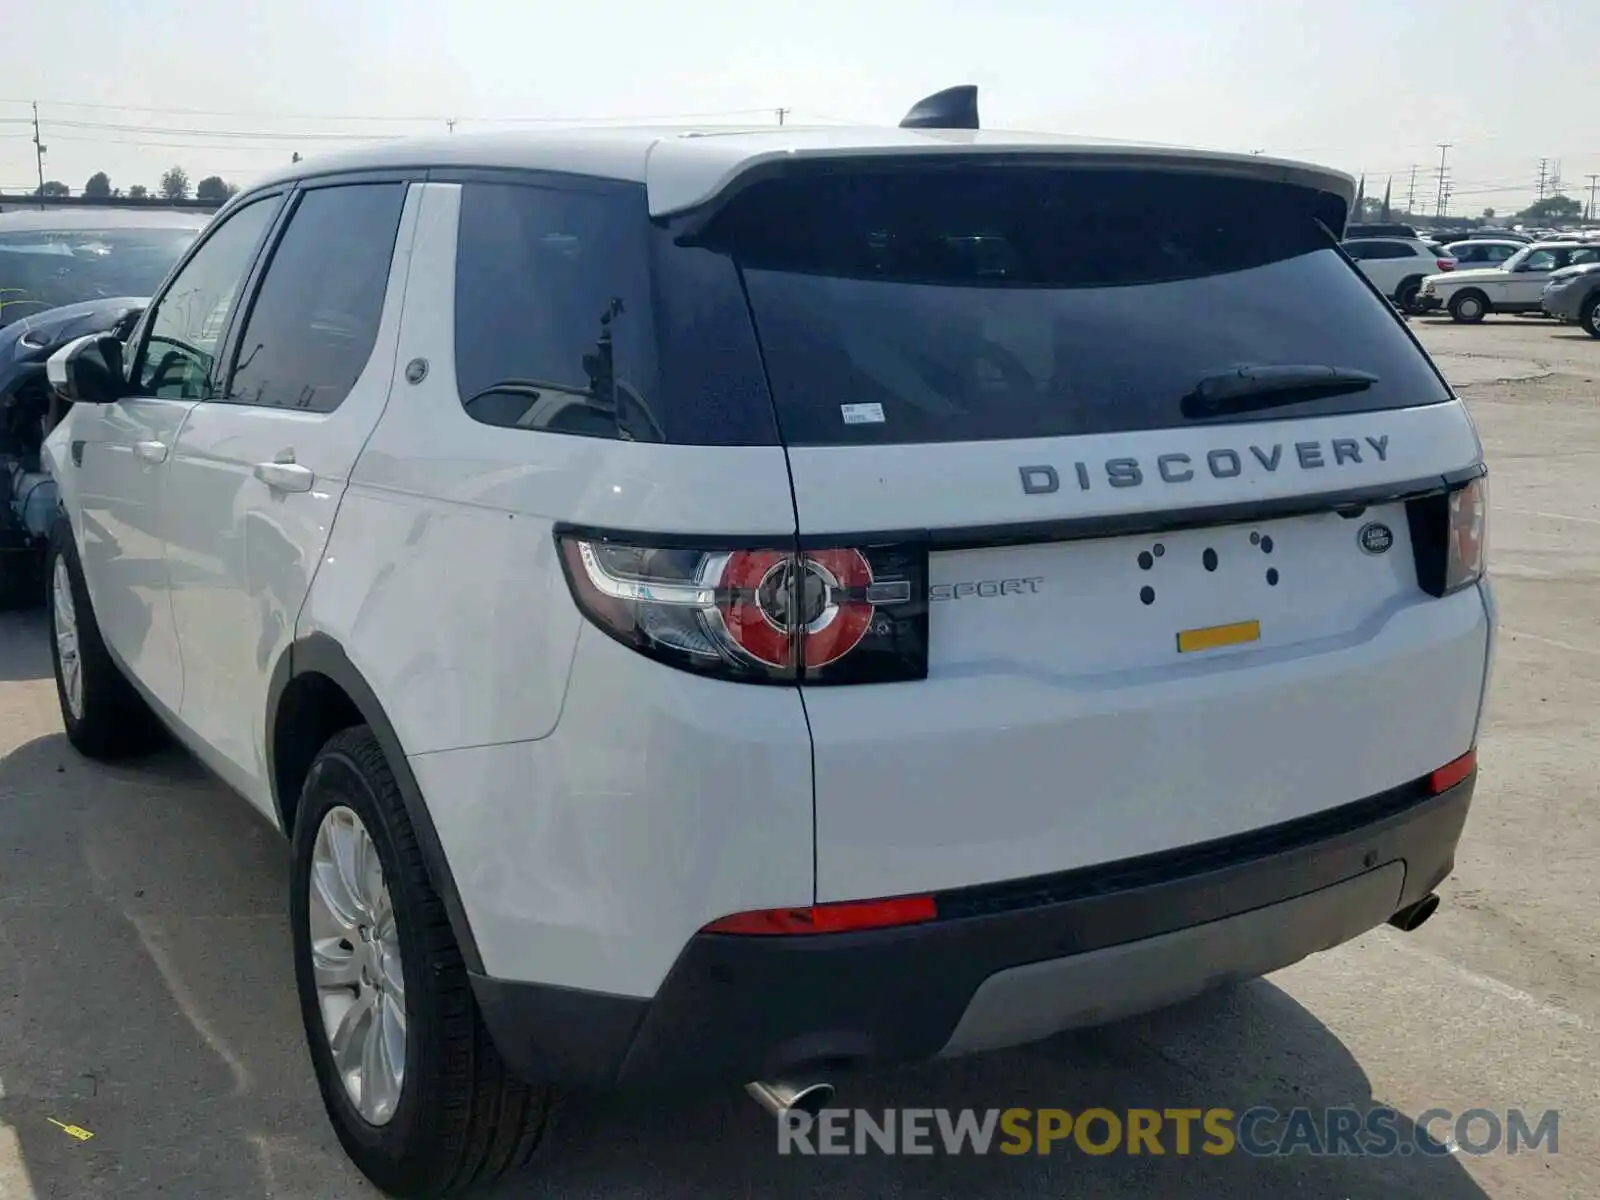 3 Photograph of a damaged car SALCP2FXXKH784077 LAND ROVER DISCOVERY 2019